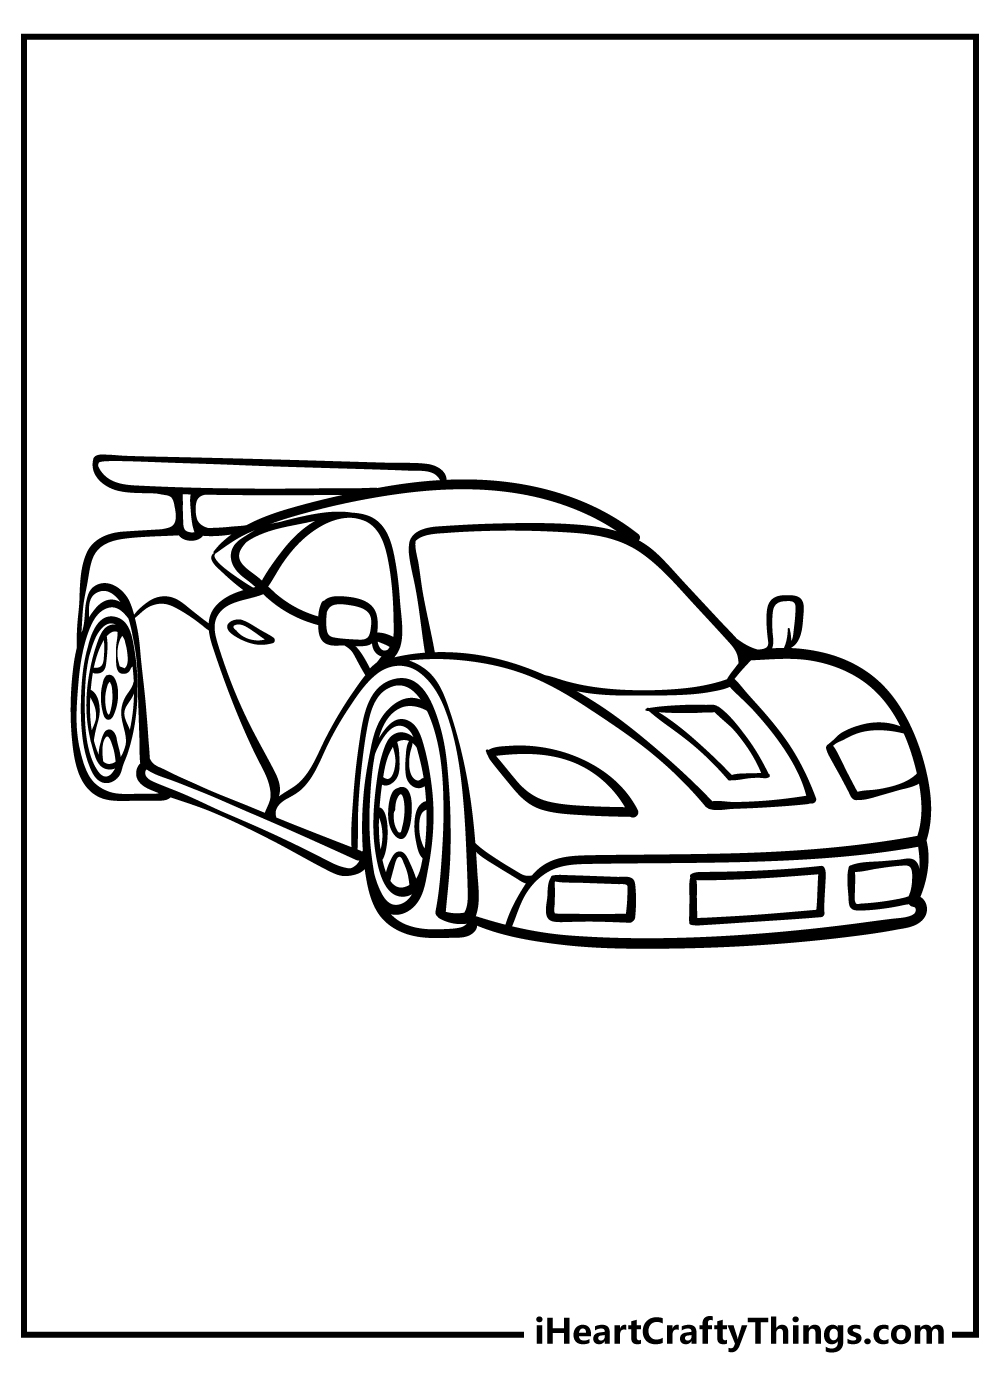 Race car coloring pages free printables